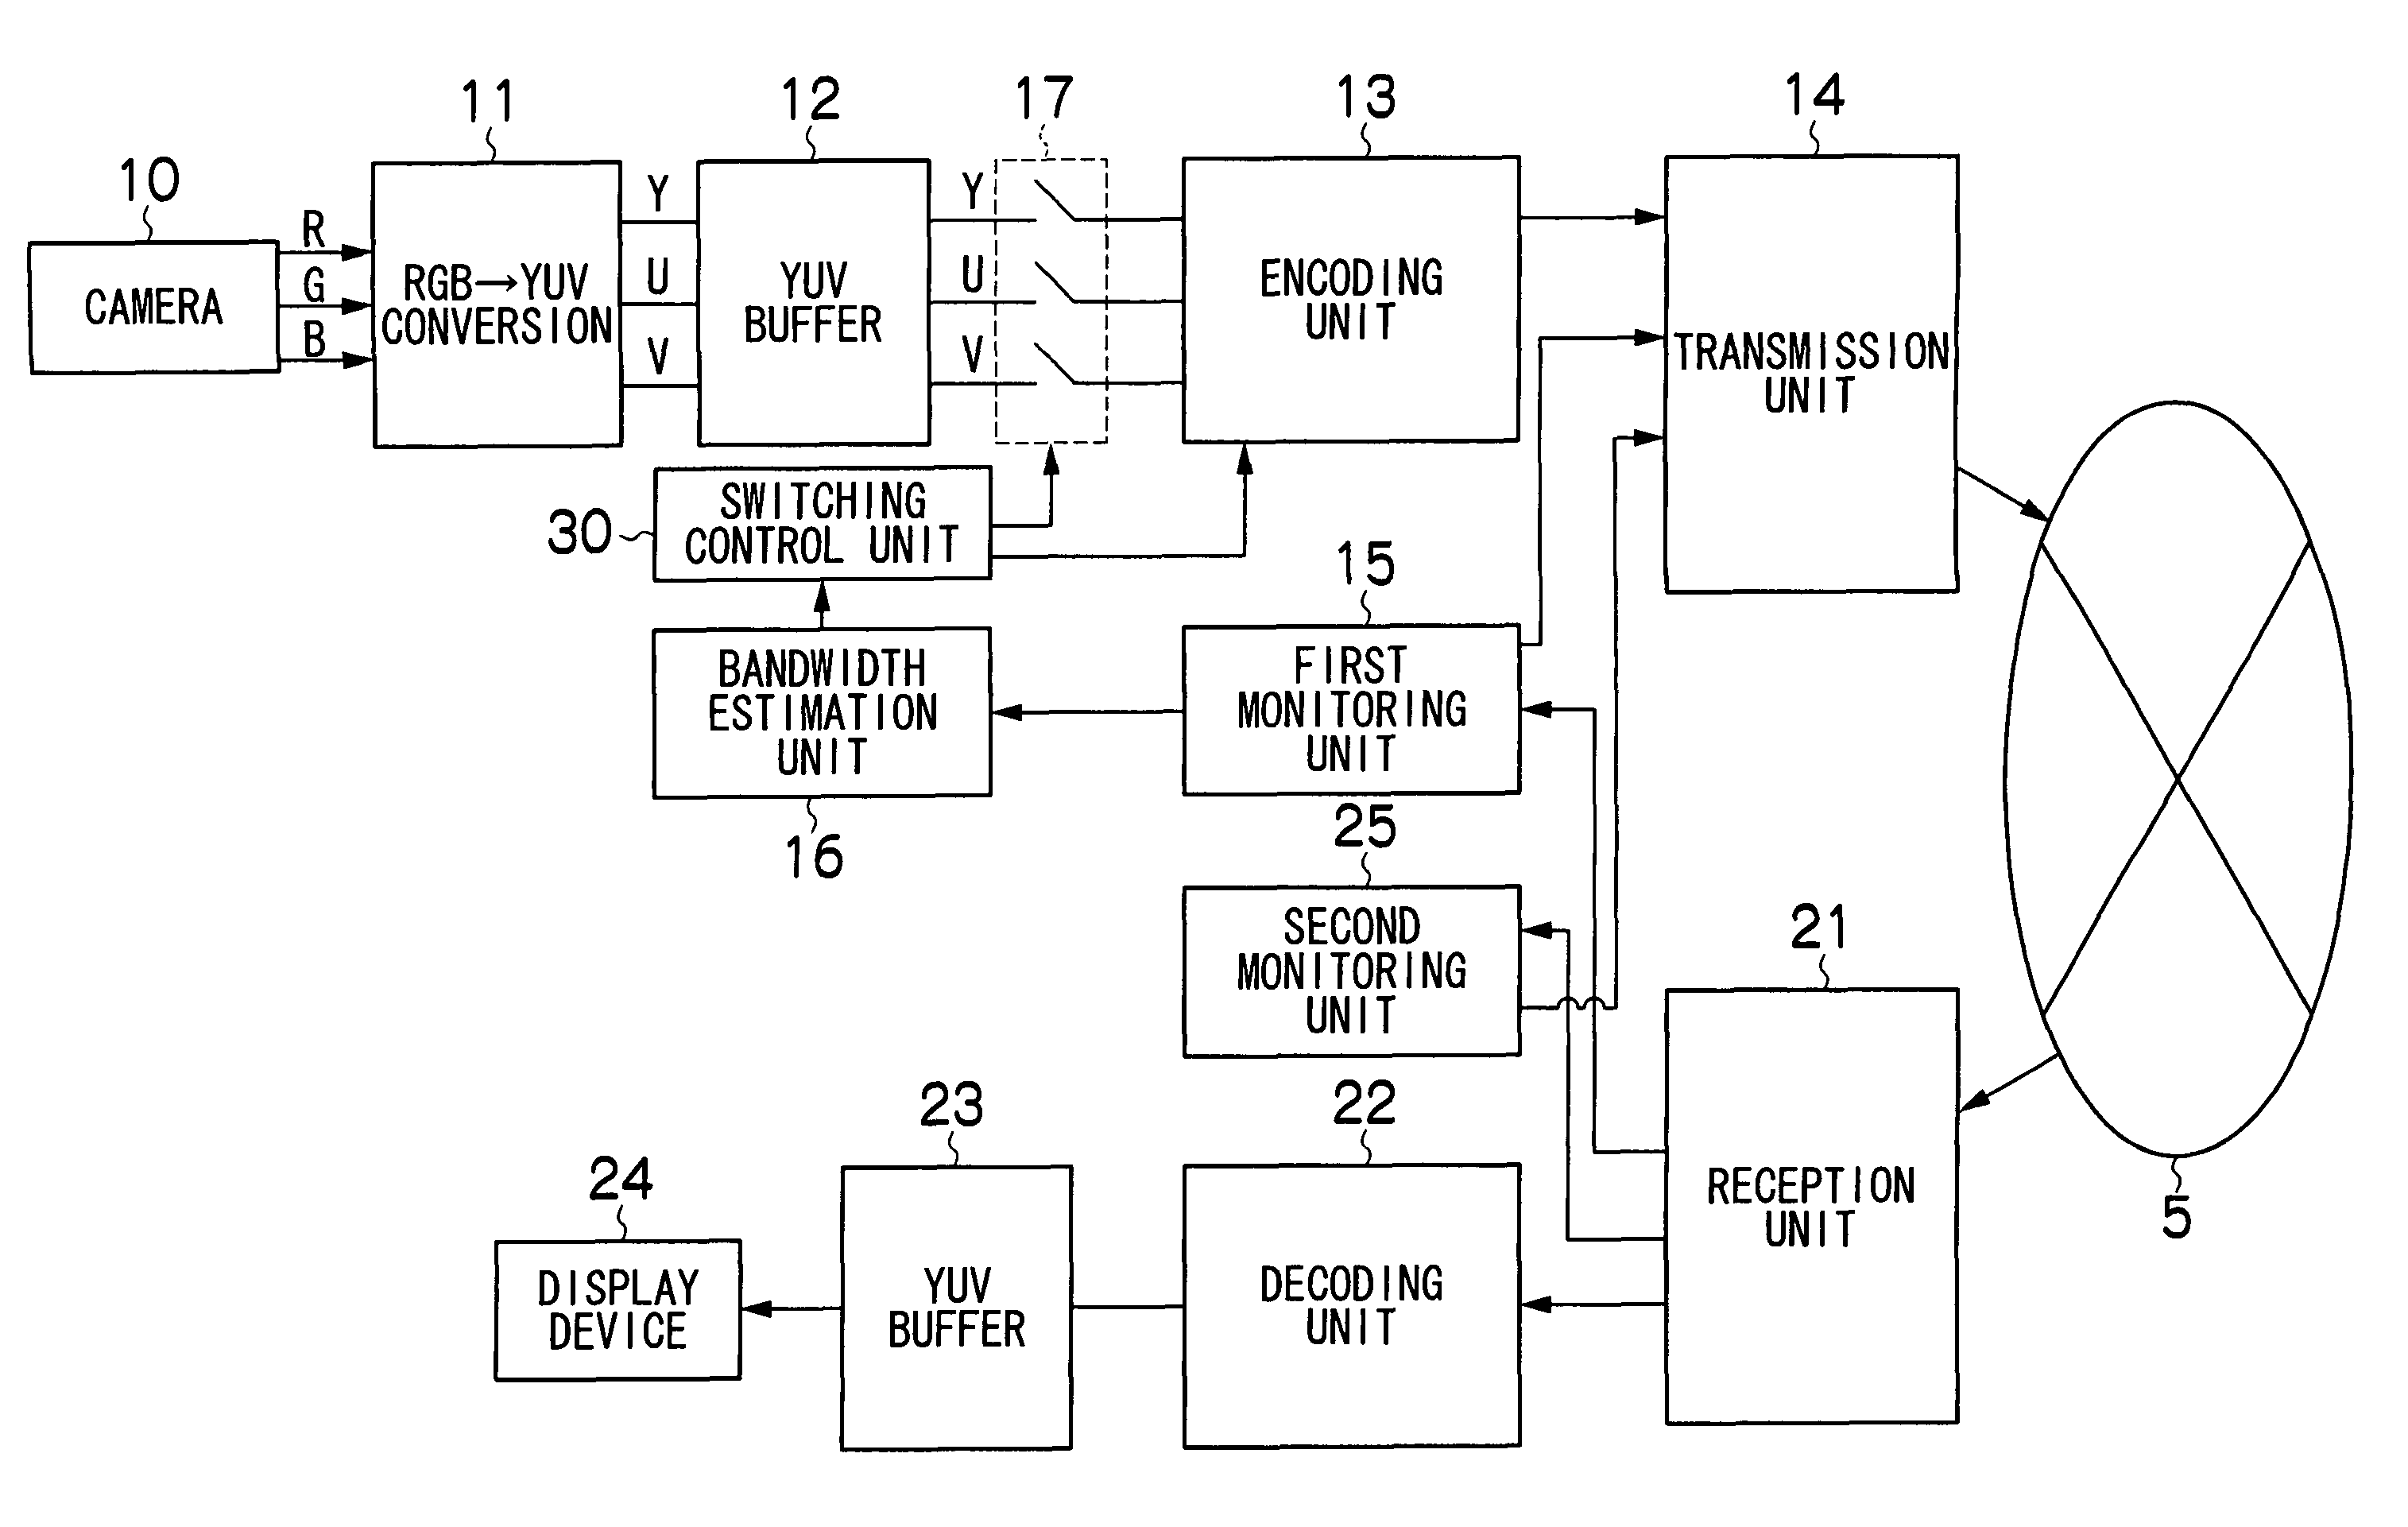 Moving picture real-time communications terminal, control method for moving picture real-time communications terminal, and control program for moving picture real-time communications terminal